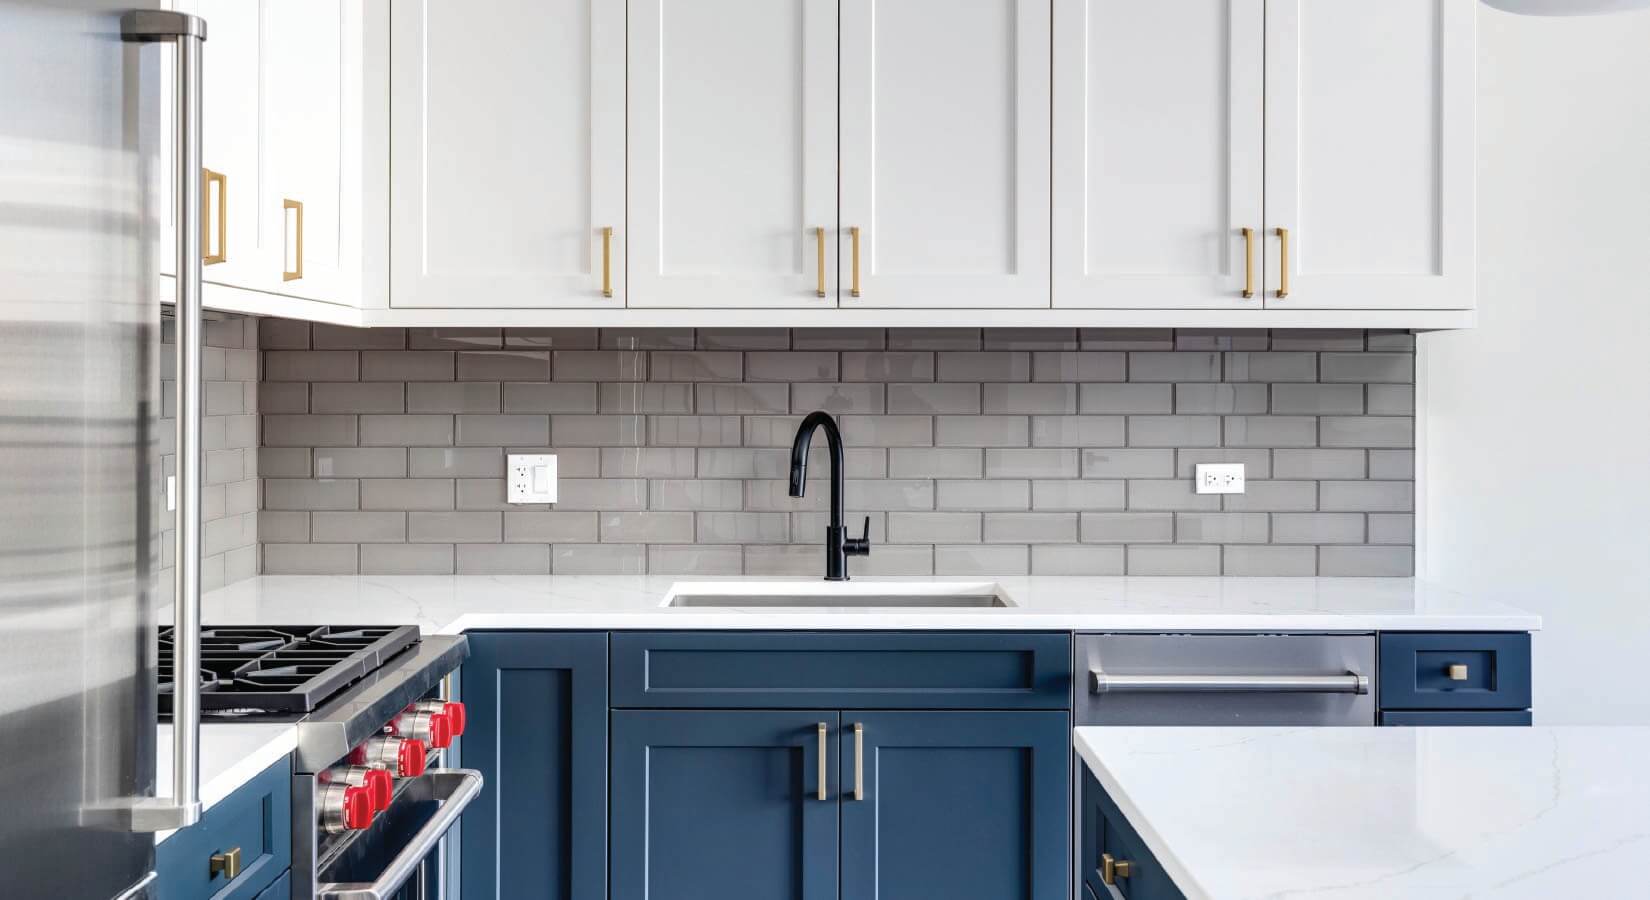 Kitchen with dark blue lower cabinets and white wall cabinets with gold hardware.